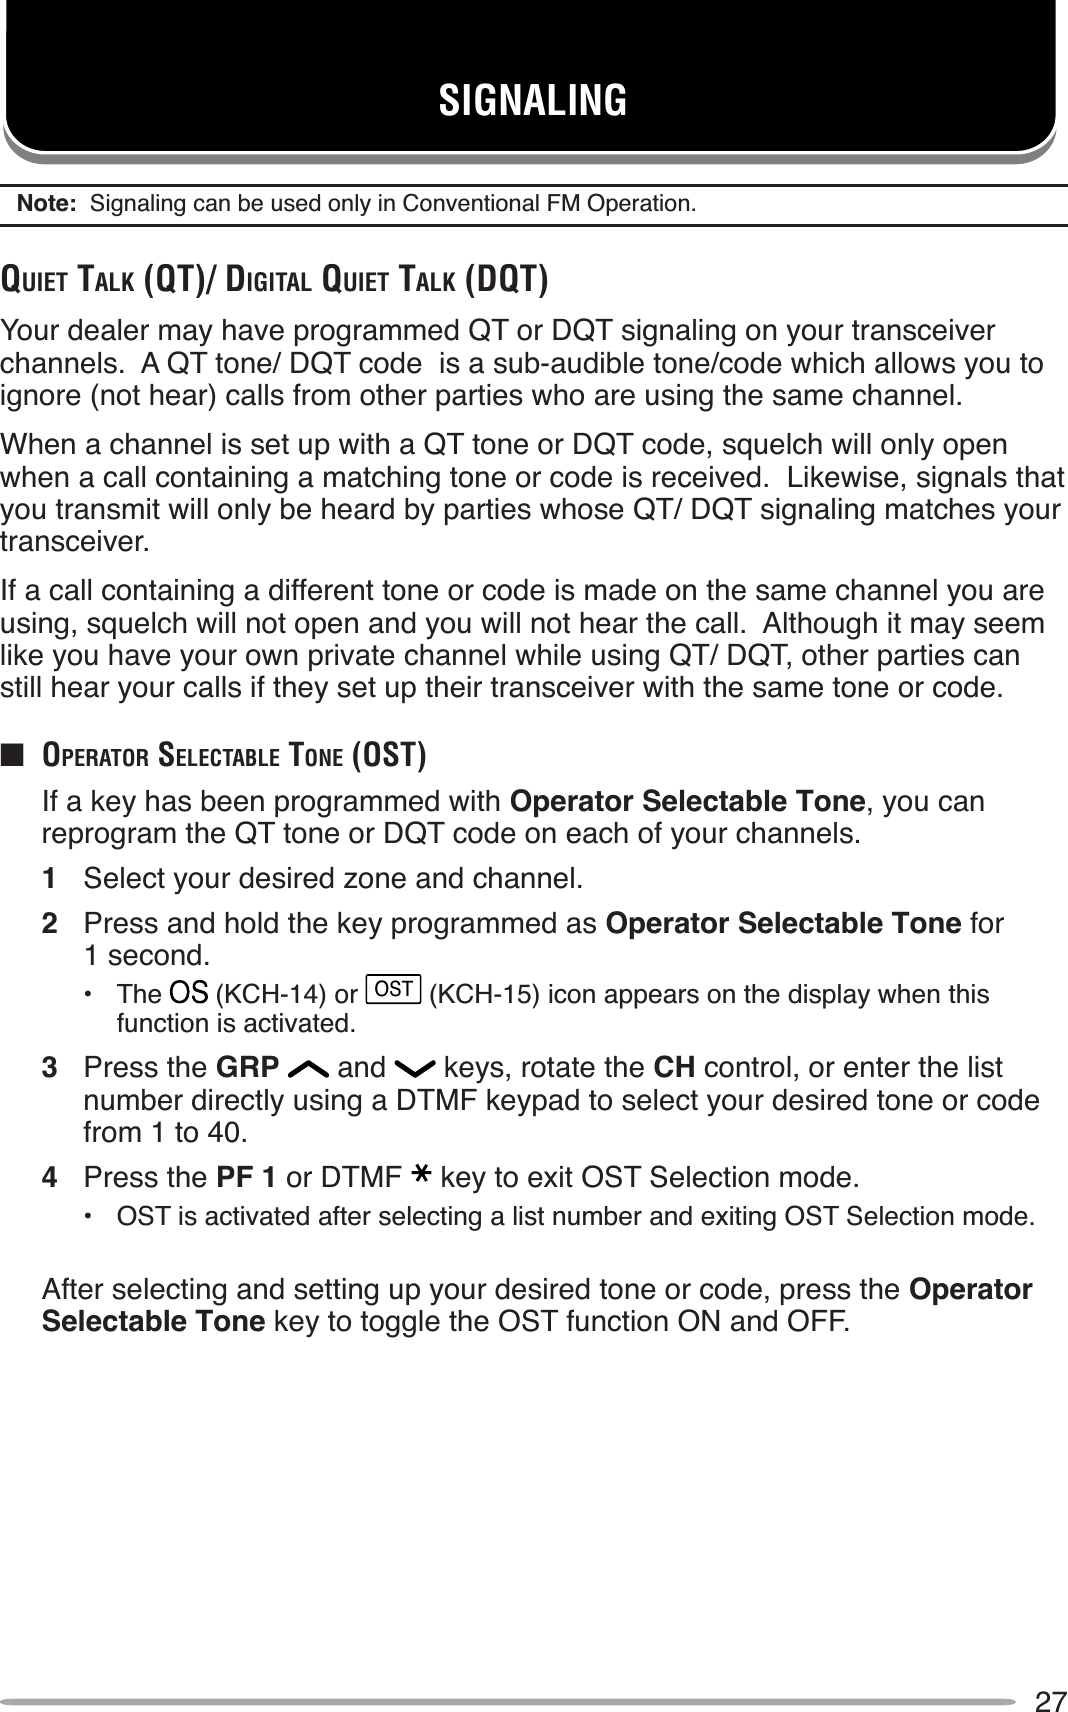 27SIGNALINGNote:  Signaling can be used only in Conventional FM Operation.QUIET TALK (QT)/ DIGITAL QUIET TALK (DQT)Your dealer may have programmed QT or DQT signaling on your transceiver channels.  A QT tone/ DQT code  is a sub-audible tone/code which allows you to ignore (not hear) calls from other parties who are using the same channel.When a channel is set up with a QT tone or DQT code, squelch will only open when a call containing a matching tone or code is received.  Likewise, signals that you transmit will only be heard by parties whose QT/ DQT signaling matches your transceiver.If a call containing a different tone or code is made on the same channel you are using, squelch will not open and you will not hear the call.  Although it may seem like you have your own private channel while using QT/ DQT, other parties can still hear your calls if they set up their transceiver with the same tone or code.Q OPERATOR SELECTABLE TONE (OST)If a key has been programmed with Operator Selectable Tone, you can reprogram the QT tone or DQT code on each of your channels.1Select your desired zone and channel.2Press and hold the key programmed as Operator Selectable Tone for 1 second.• The  (KCH-14) or OST (KCH-15) icon appears on the display when this function is activated.3Press the GRP  and   keys, rotate the CH control, or enter the list number directly using a DTMF keypad to select your desired tone or code from 1 to 40.4Press the PF 1 or DTMF key to exit OST Selection mode.• OST is activated after selecting a list number and exiting OST Selection mode.After selecting and setting up your desired tone or code, press the OperatorSelectable Tone key to toggle the OST function ON and OFF.